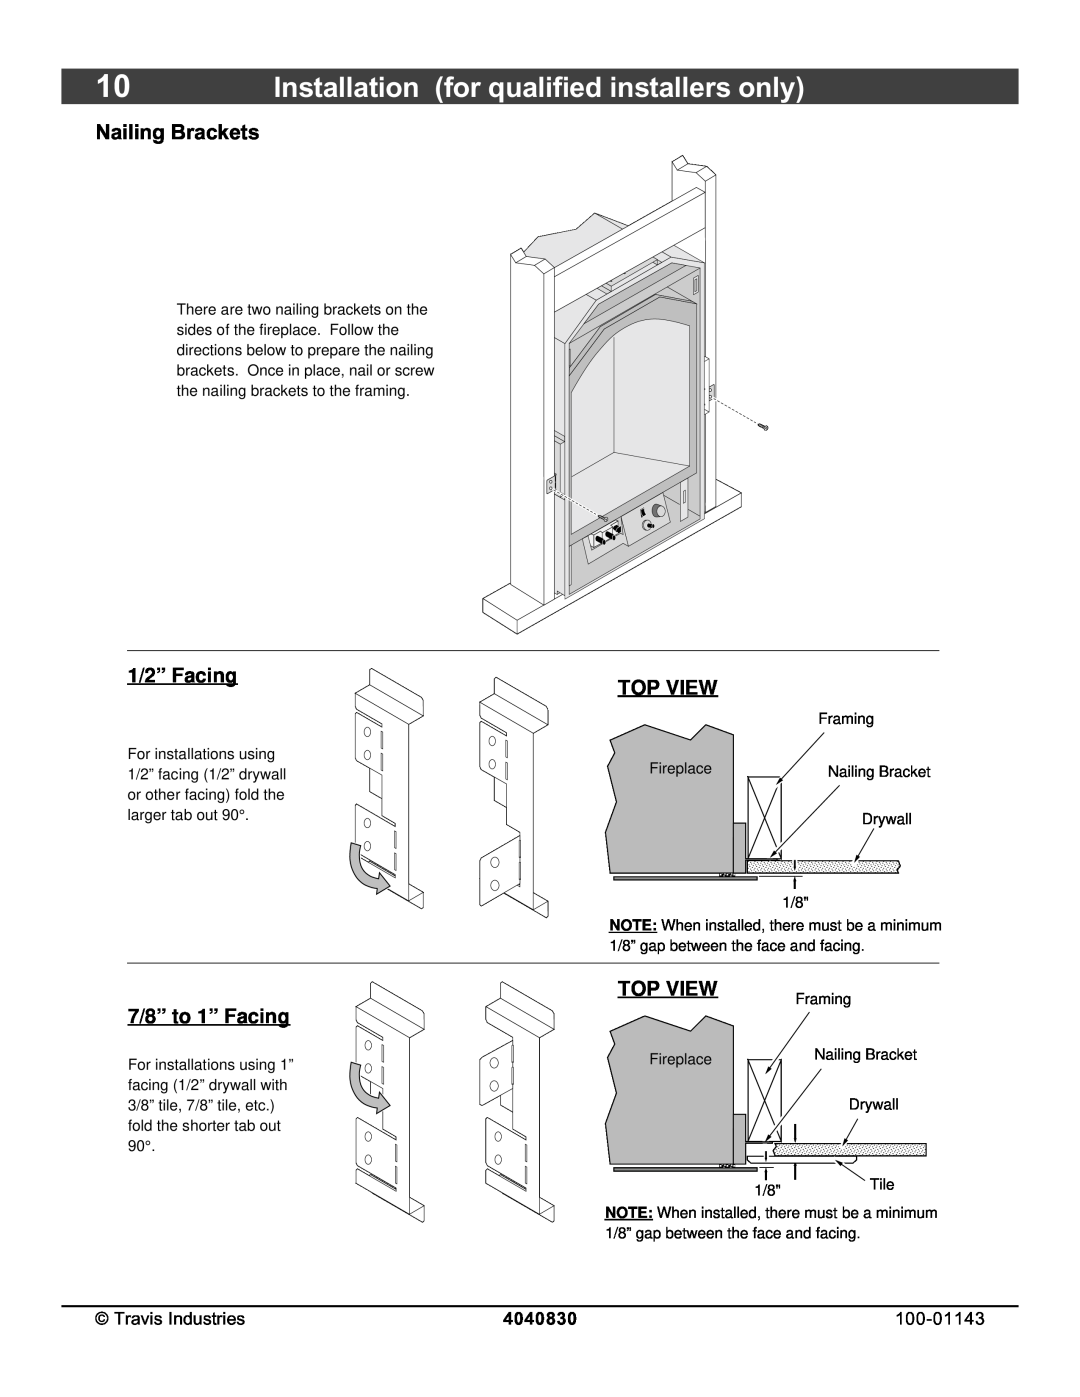 Avalon Stoves 21 DV Fireplace manual Installation for qualified installers only, 1/2” Facing, 7/8” to 1” Facing, Top View 